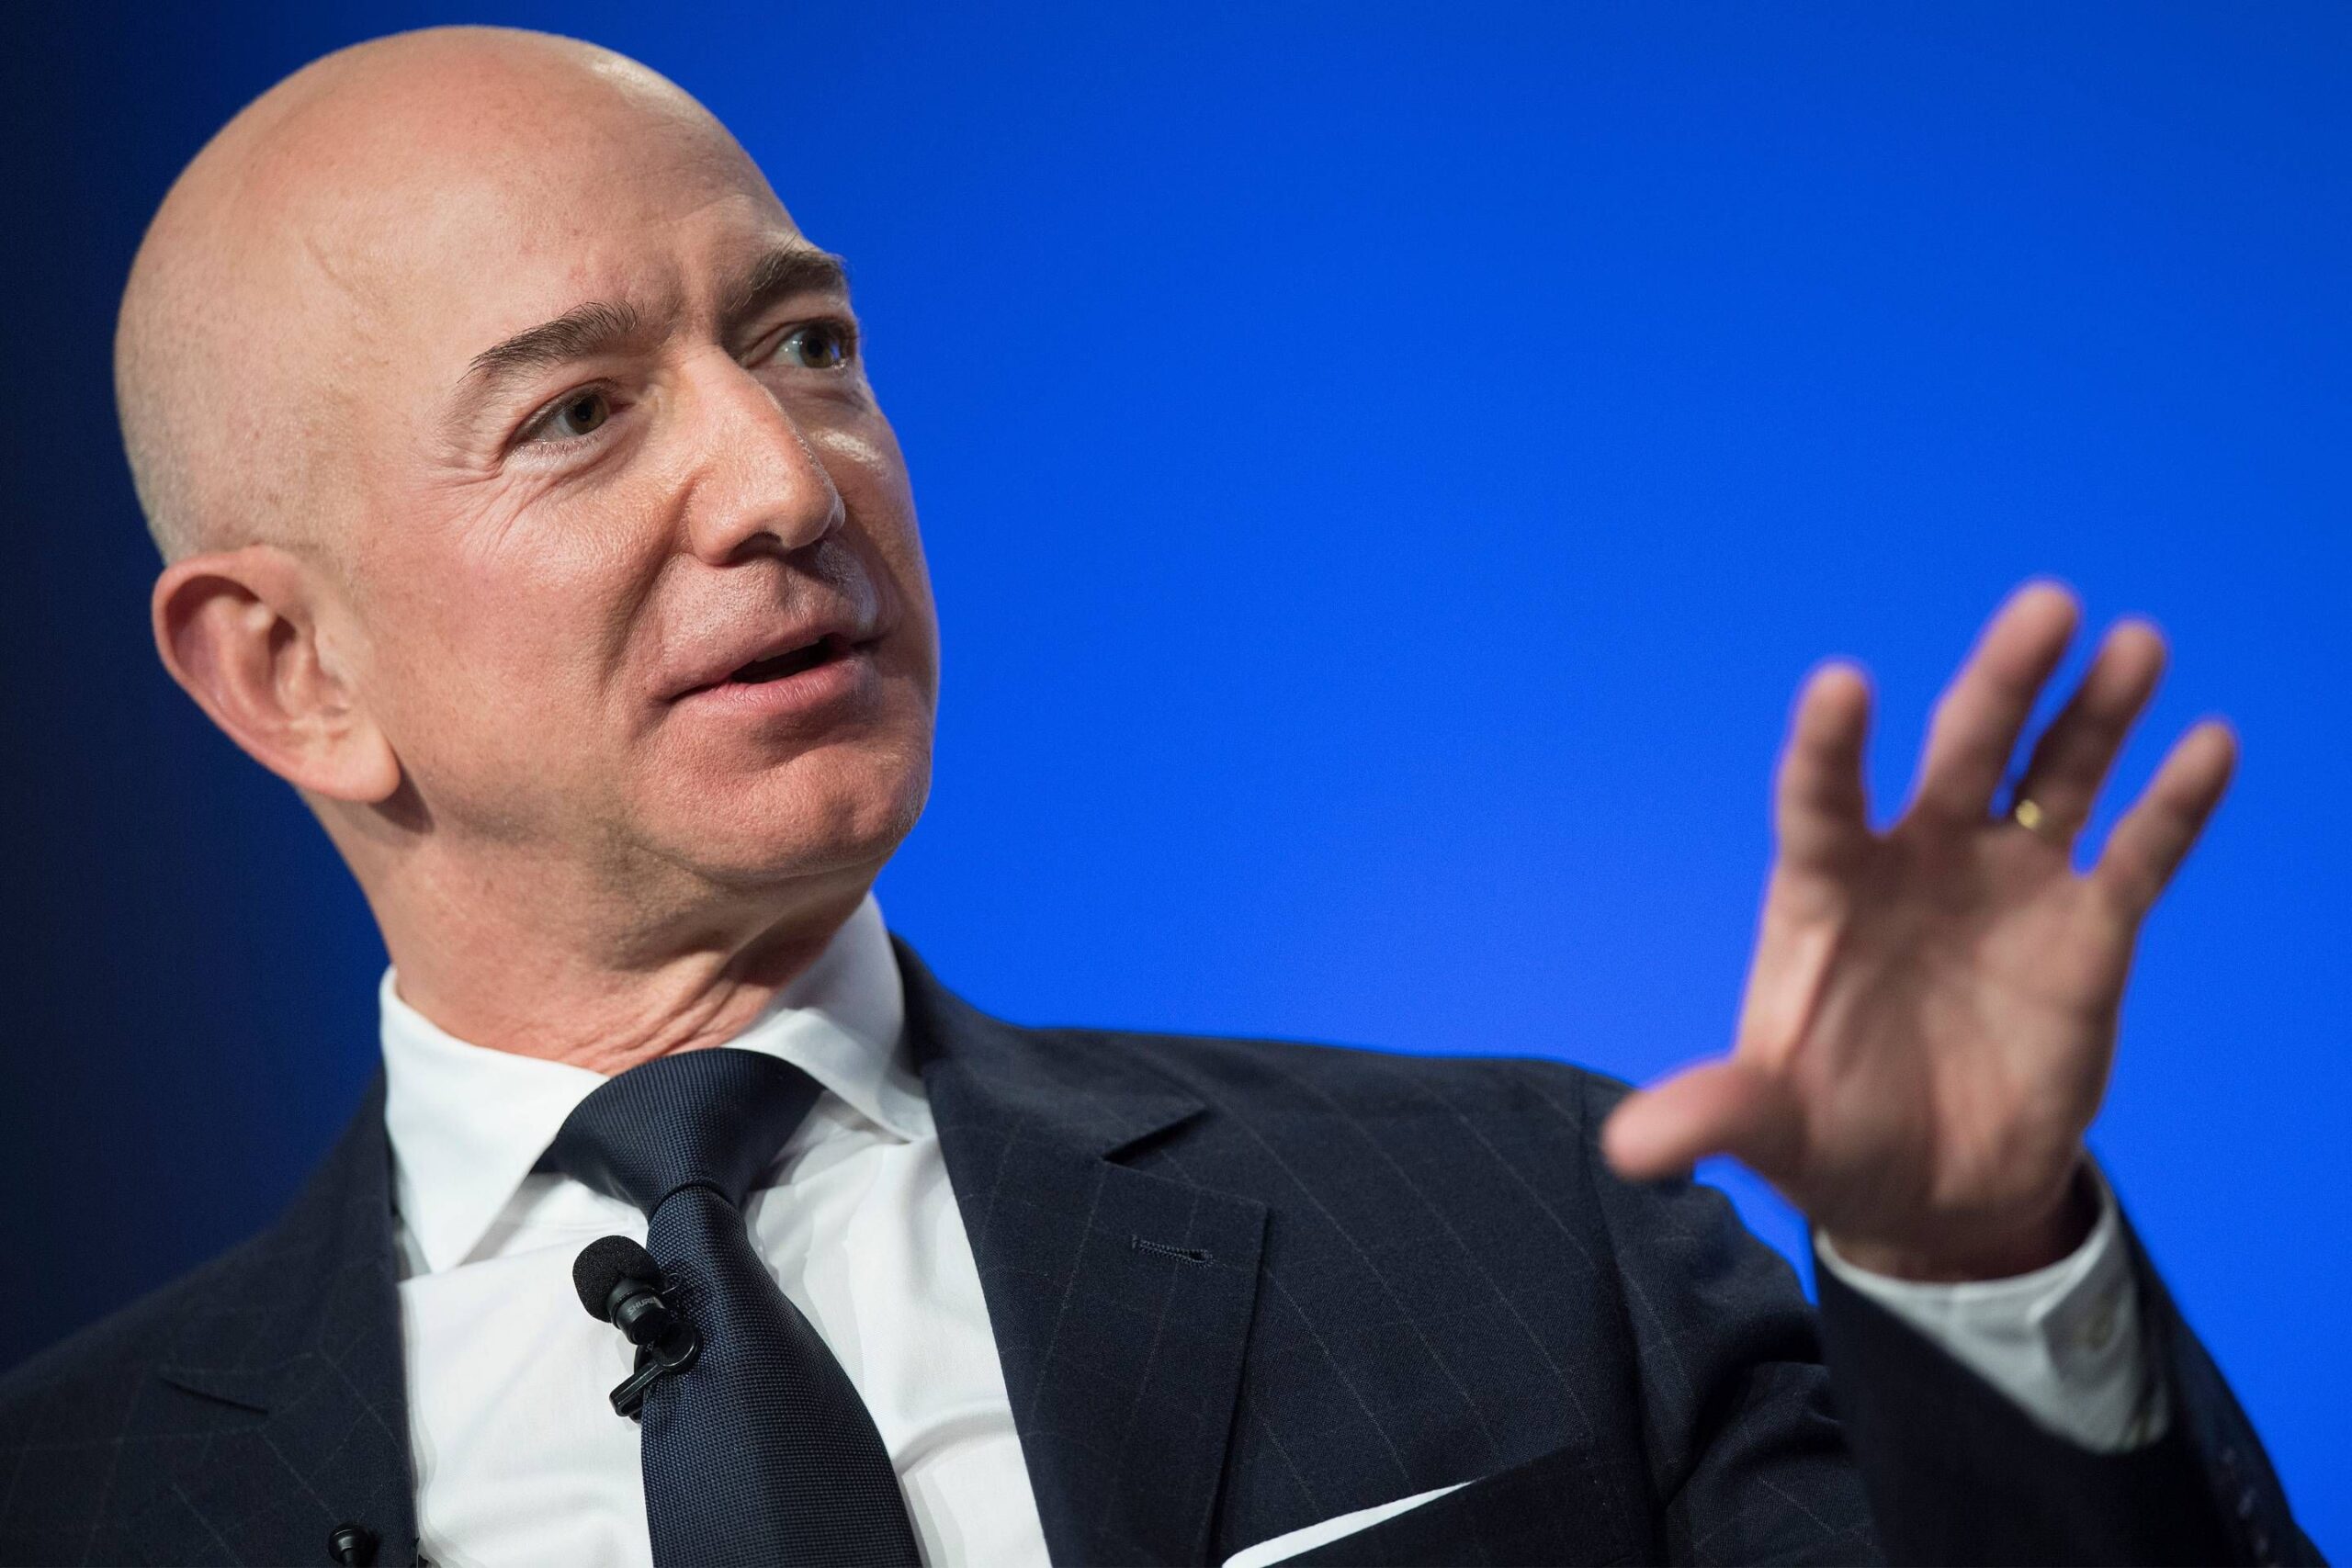 Amazon founder Jeff Bezos Says Blue Origin Will Put People in Space in 2019